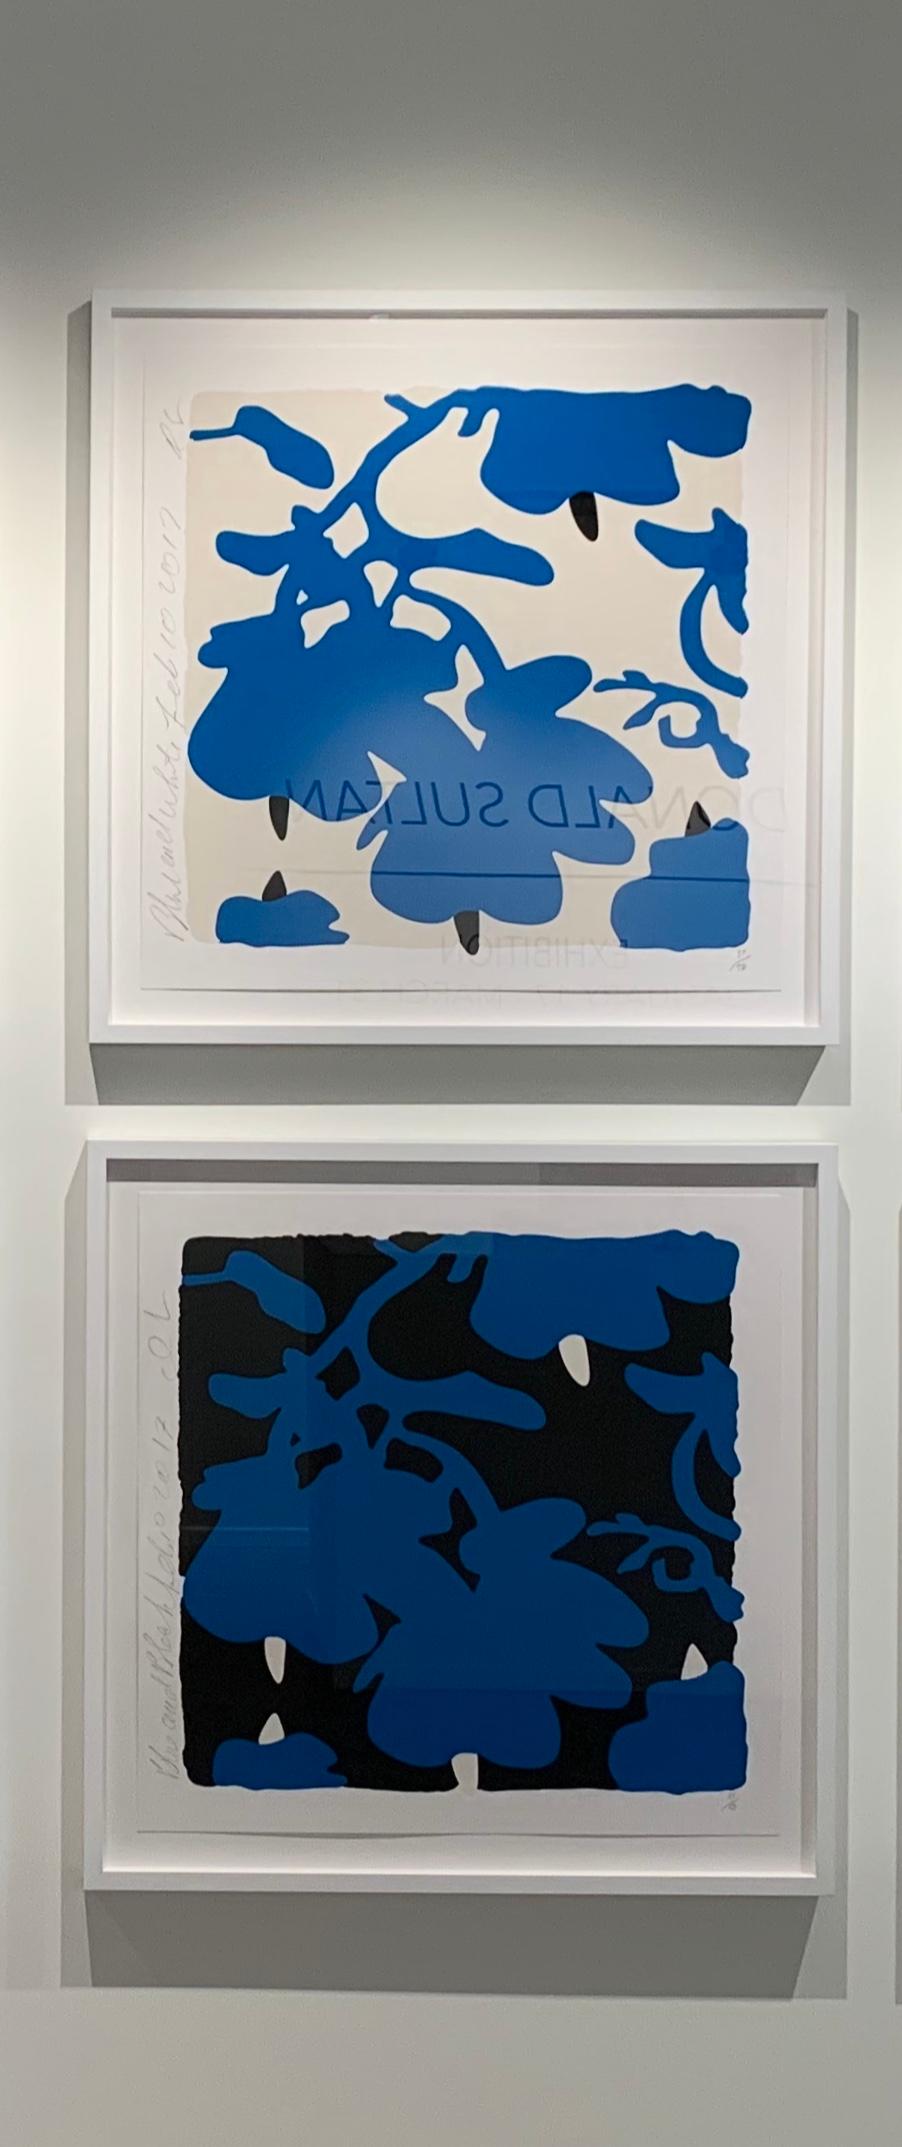 Lantern Flowers (Blue and White)Color silkscreen with over-printed flocking on R - Abstract Print by Donald Sultan